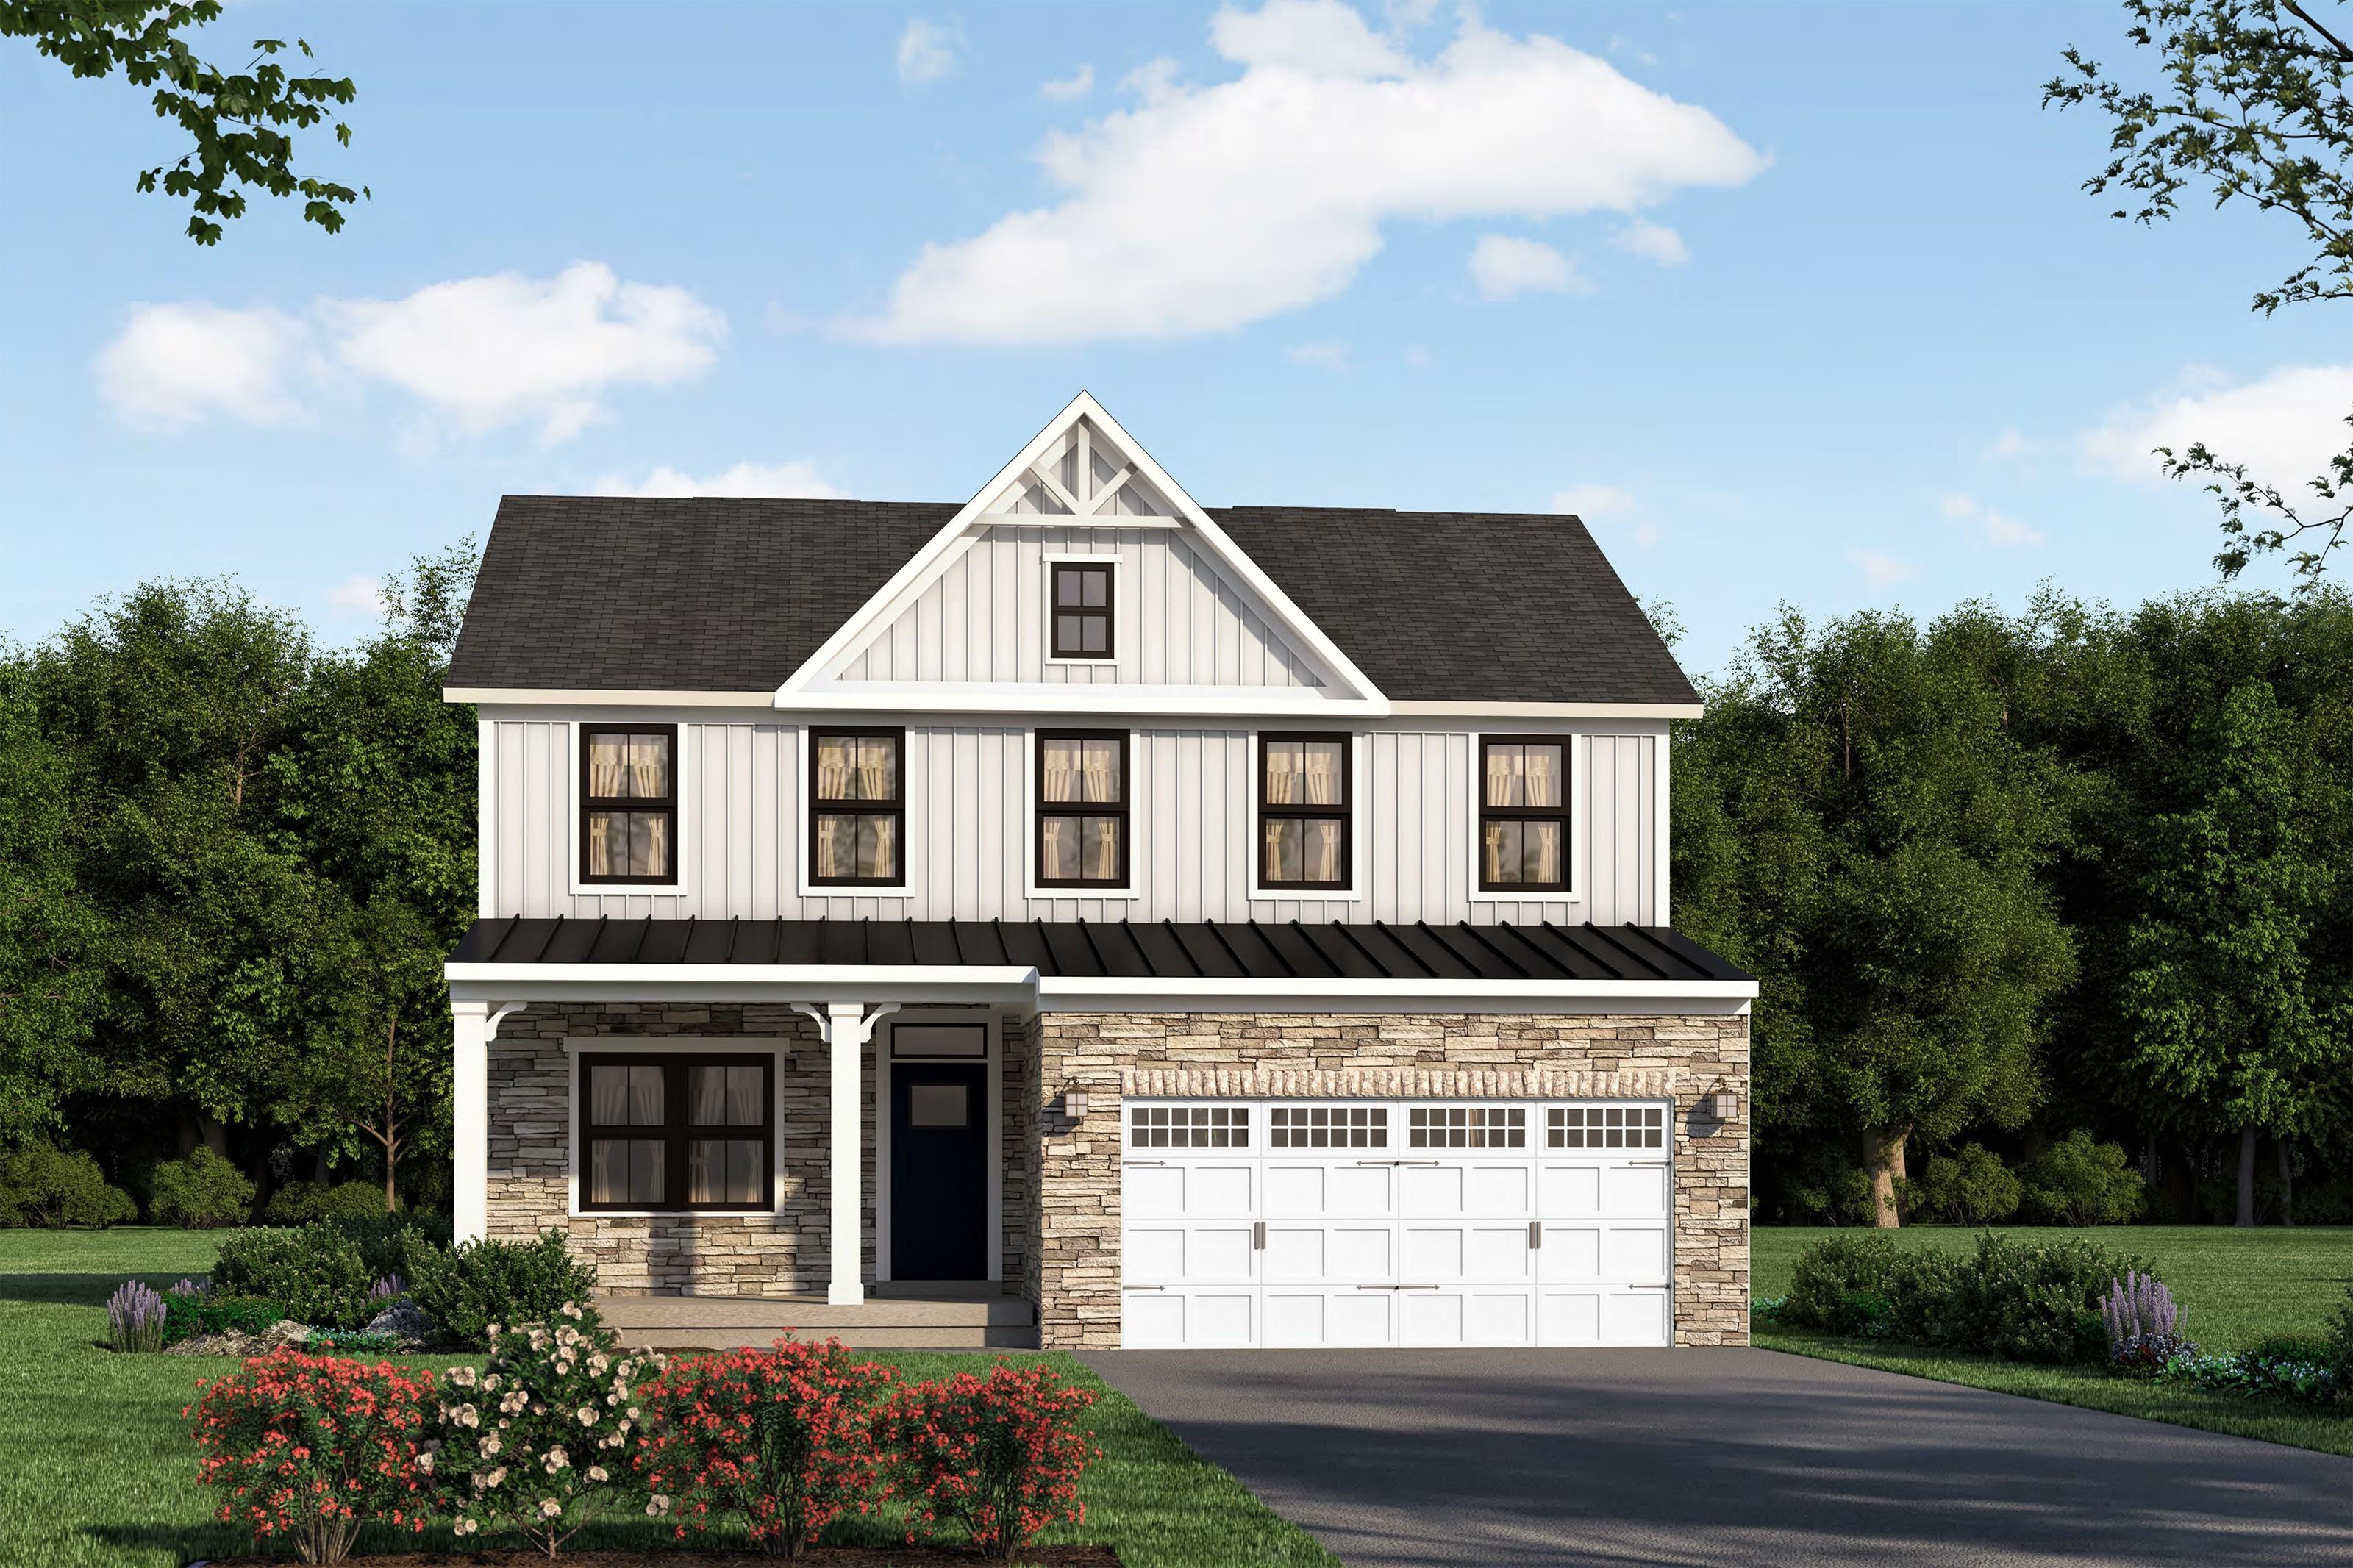 Property Image for 8220 Kirby St. Plan: Columbia